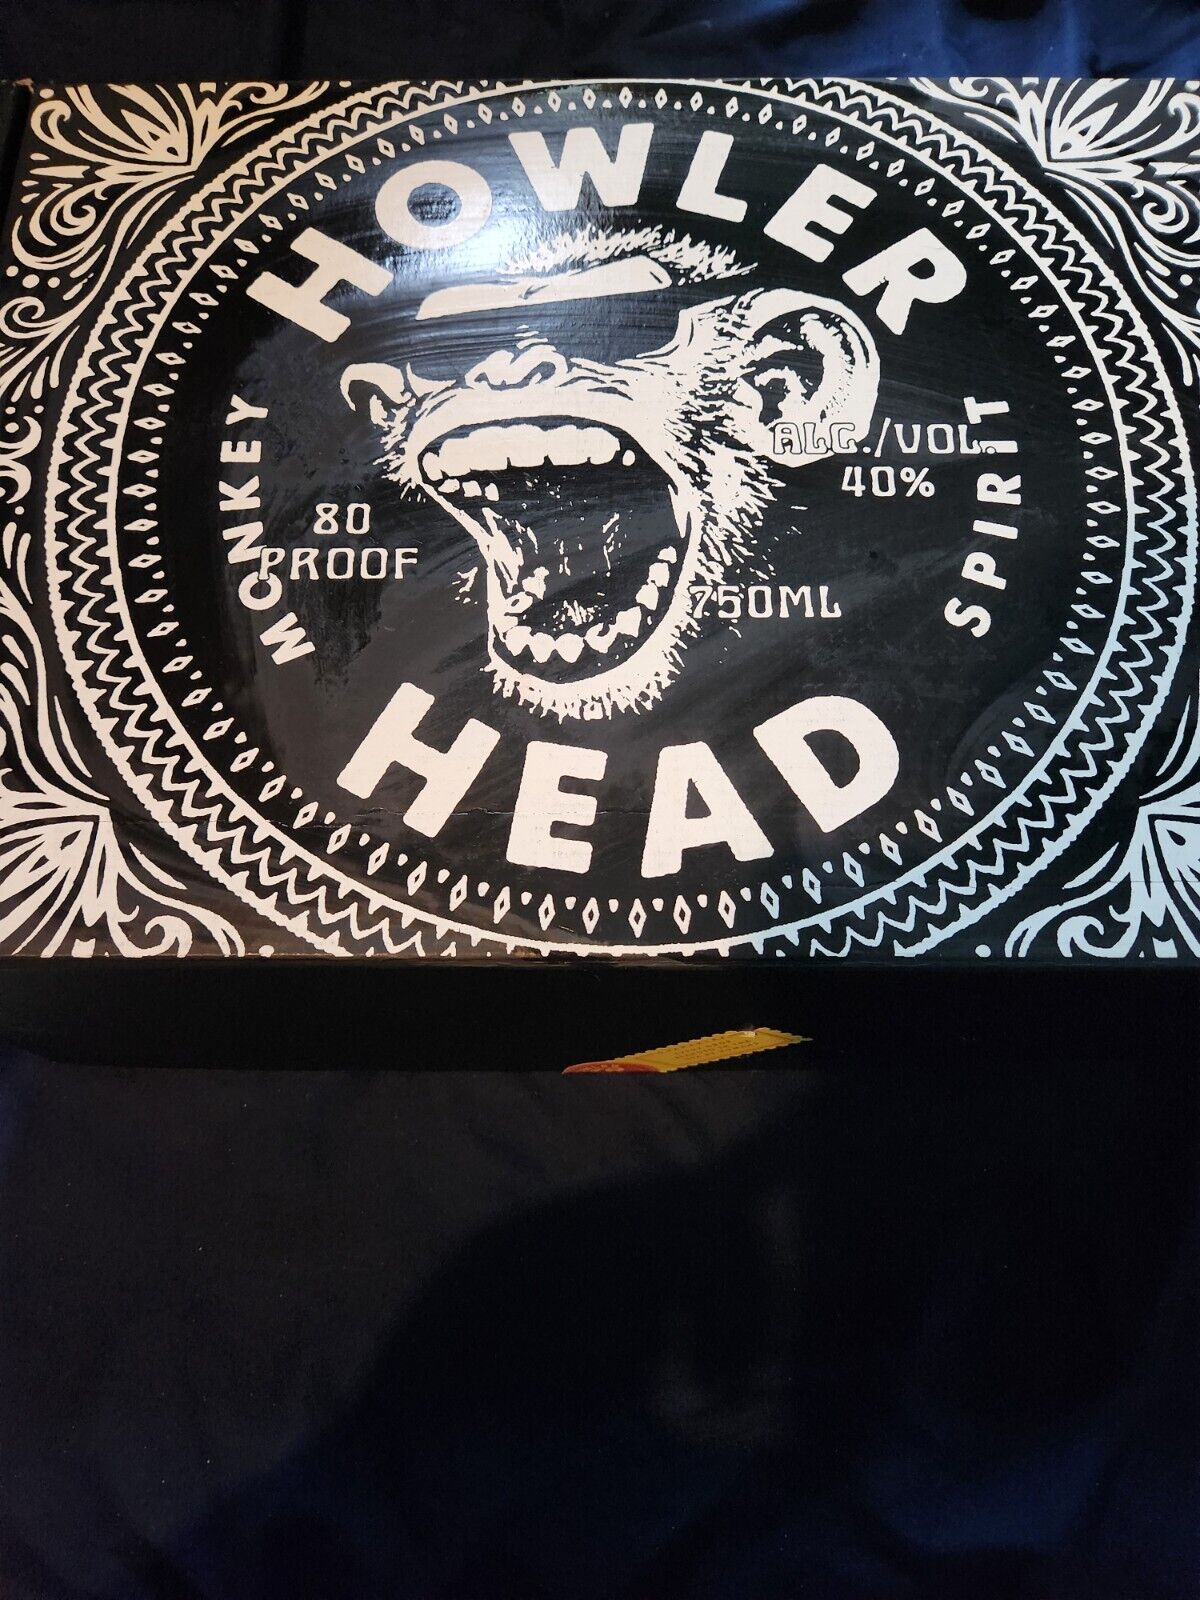 Howler Head Whiskey Limited Edition Beer Pong Set With Cocktail Recipe Book